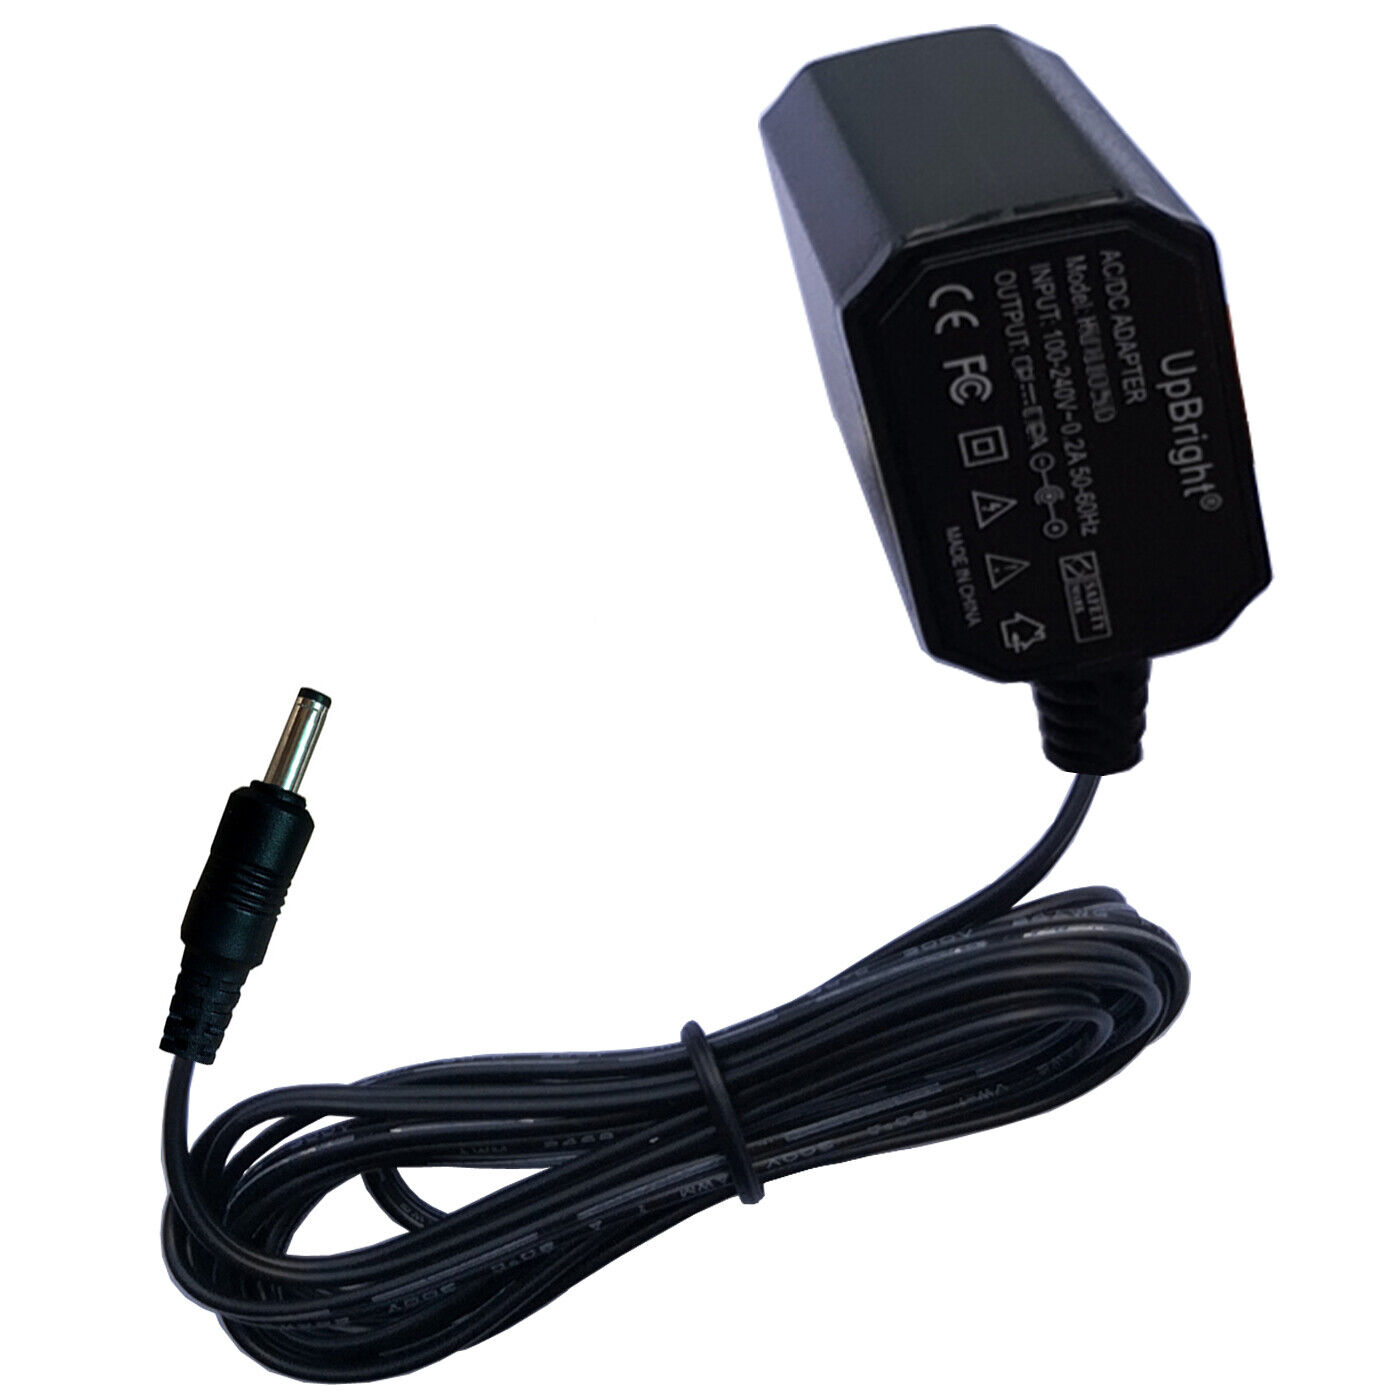 USB DC Cable or AC Adapter For Water Tech 17051AL Pool Blaster Spa Vac Recharge